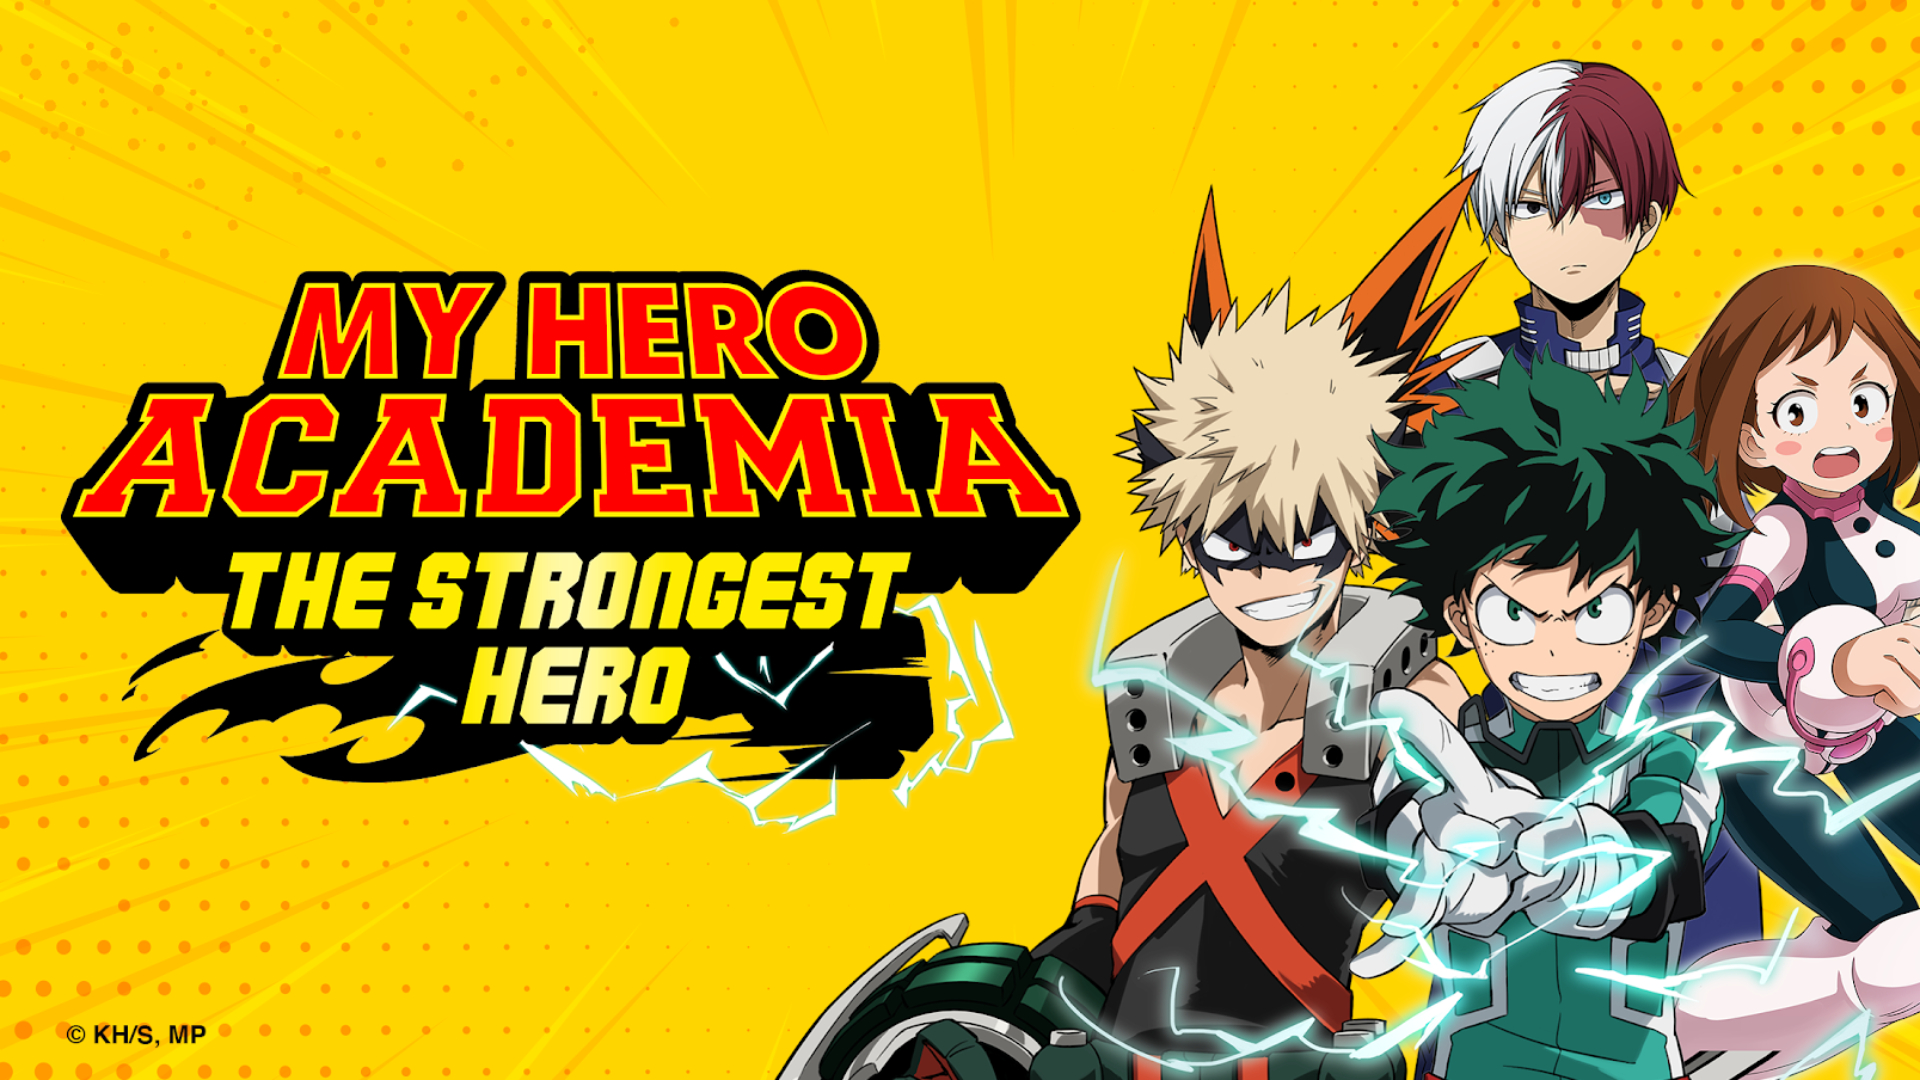 Best anime games: My Hero Academia: The Strongest Hero. Image shows four main characters from My Hero Academia.